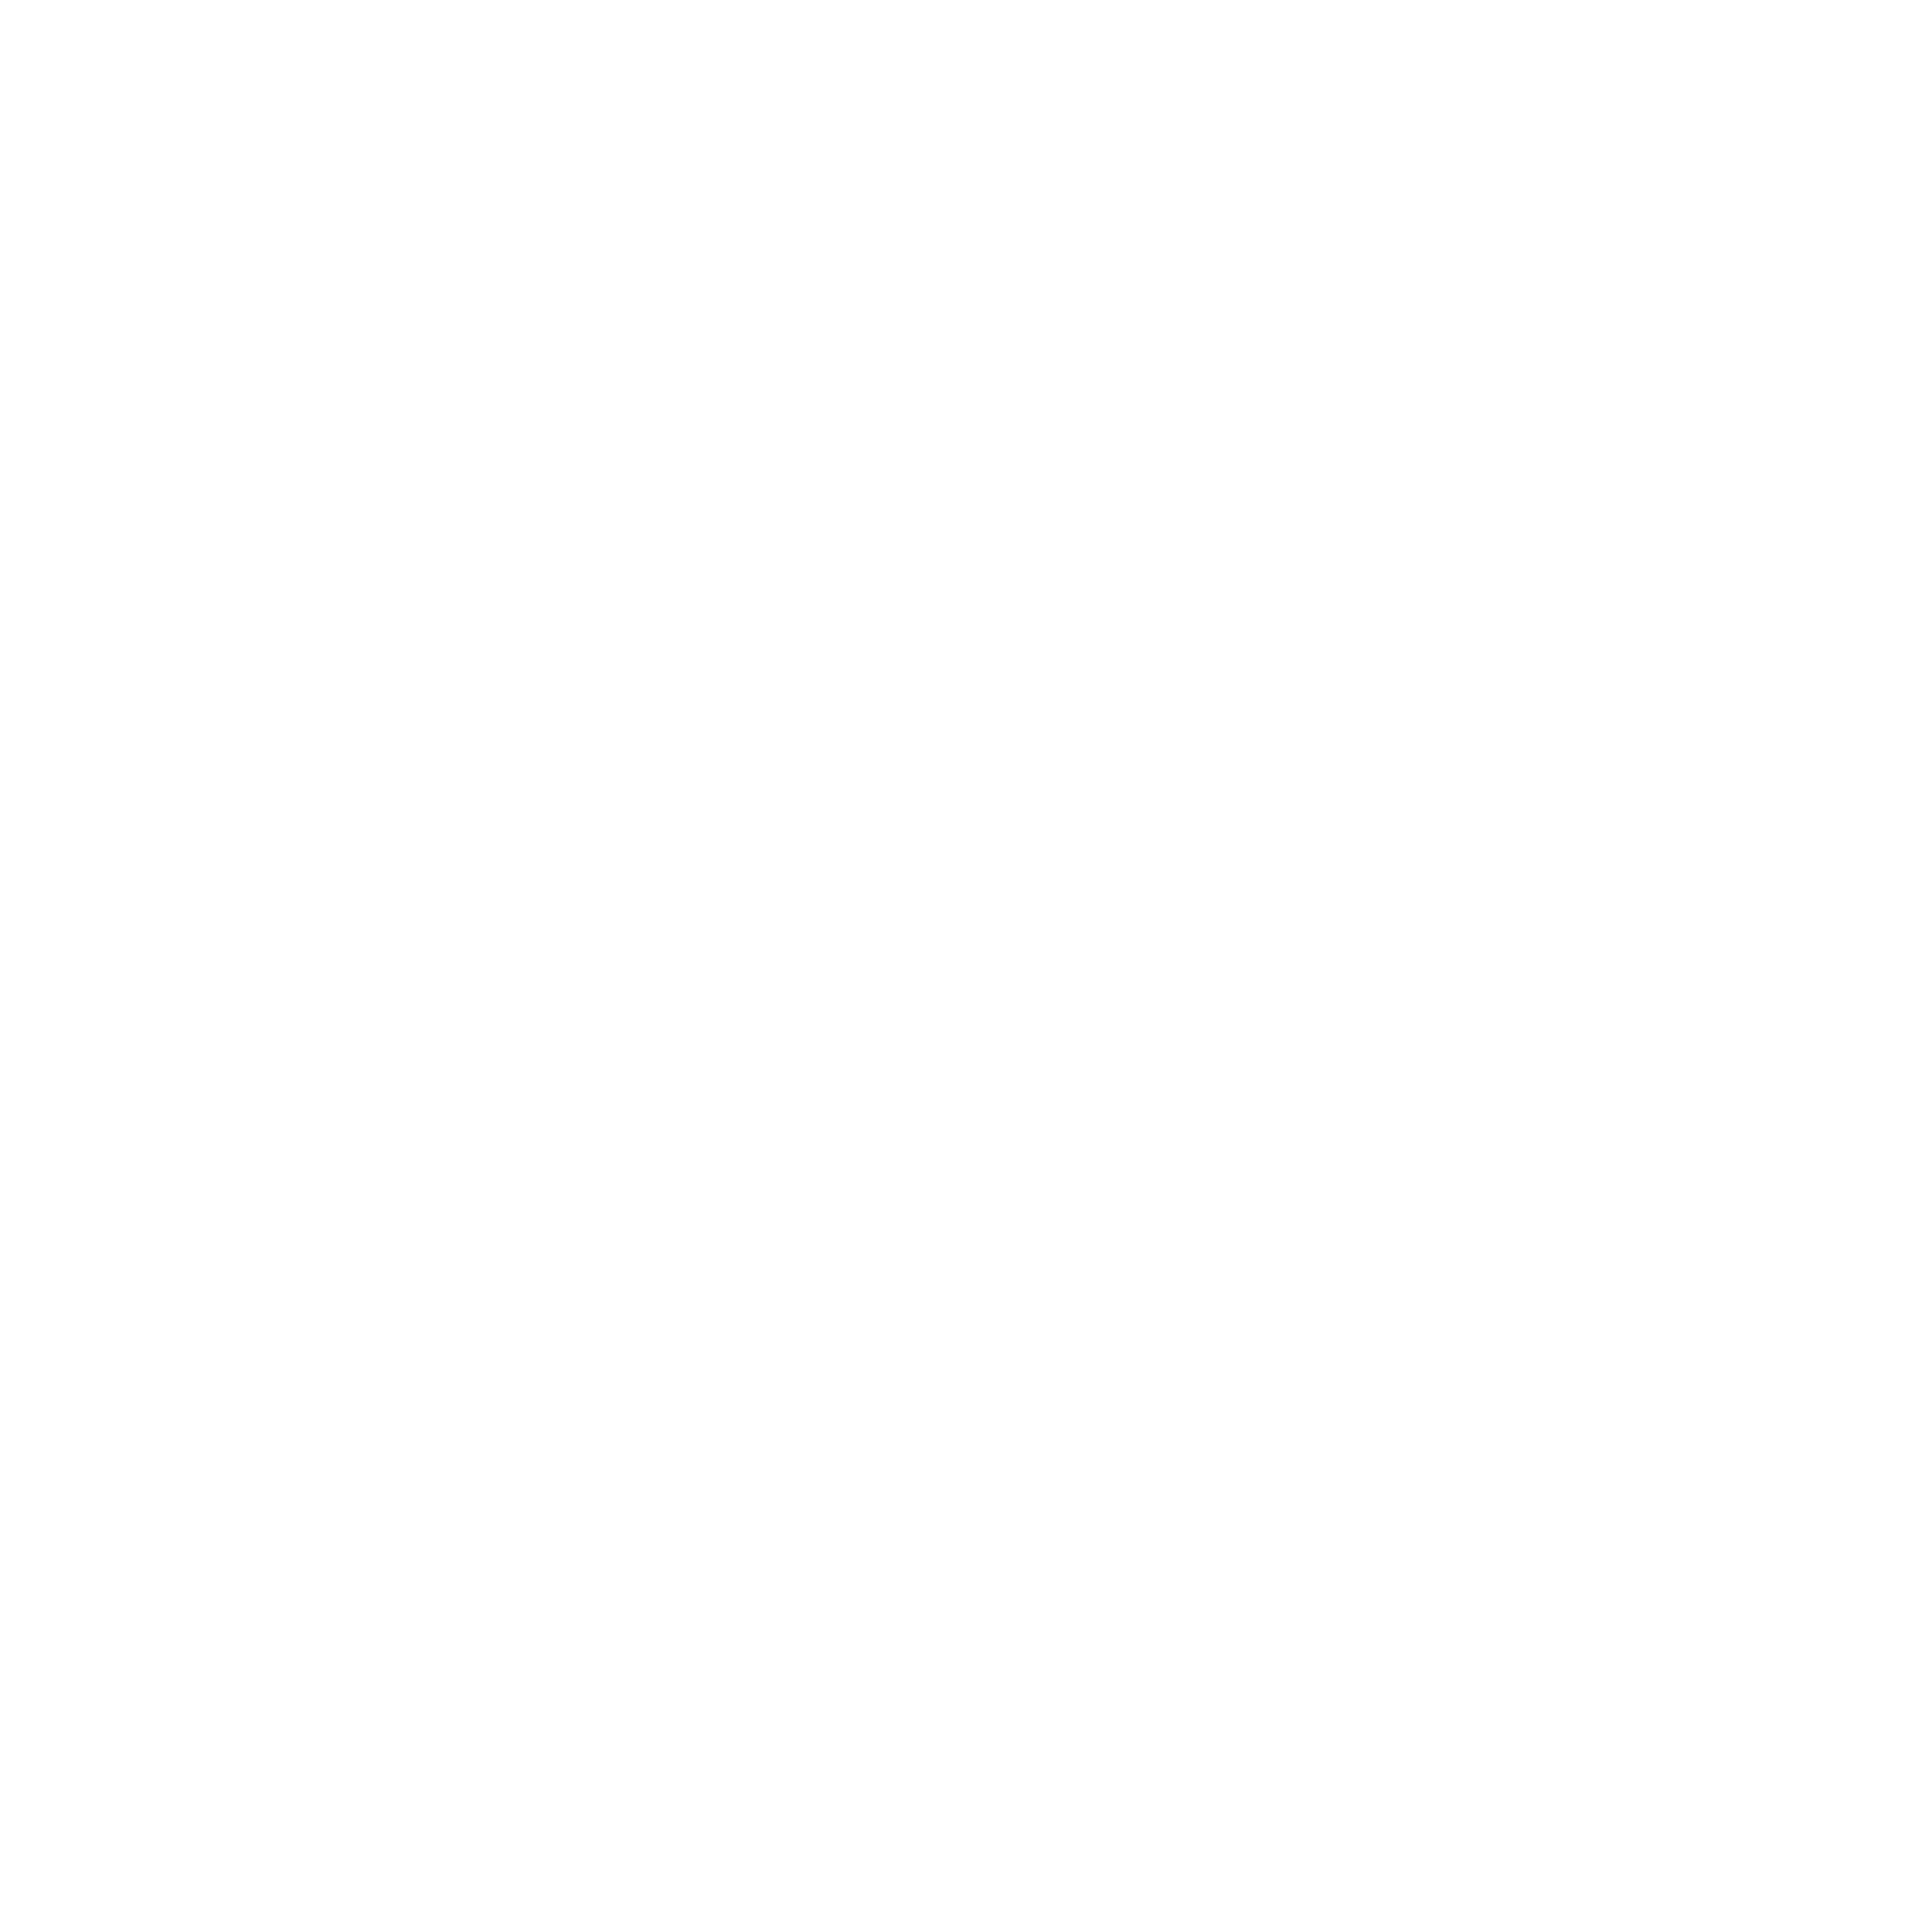 Vertcoin Cryptocurrency icon